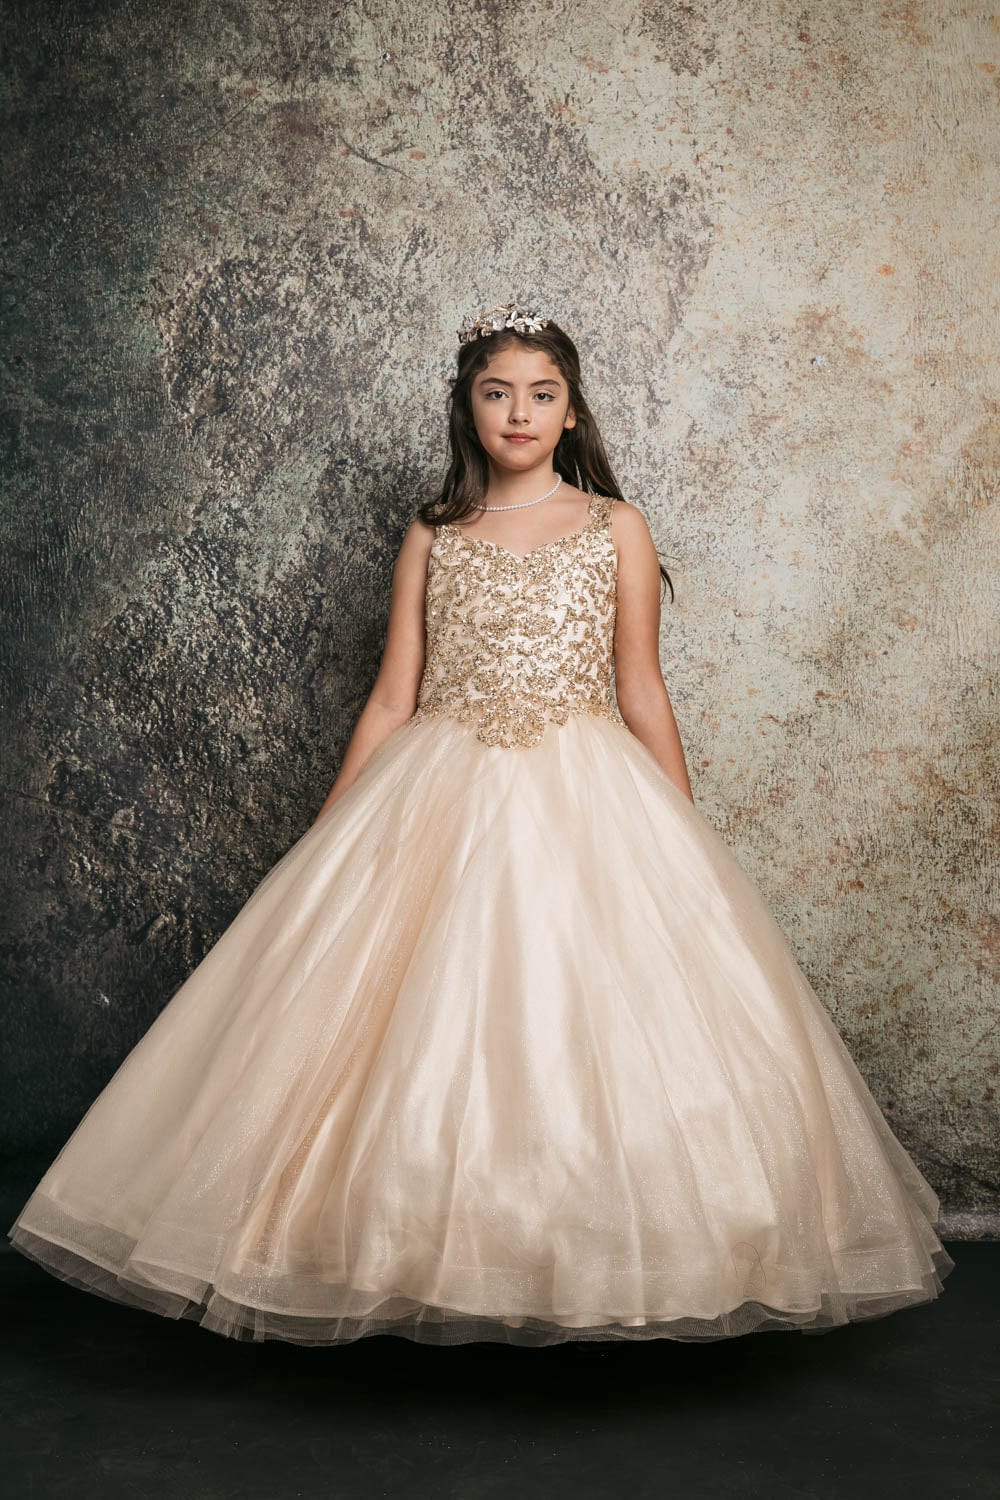 communion dresses Princess Sequin Embroidery Ball Gown Petite Adele flower girl dresses